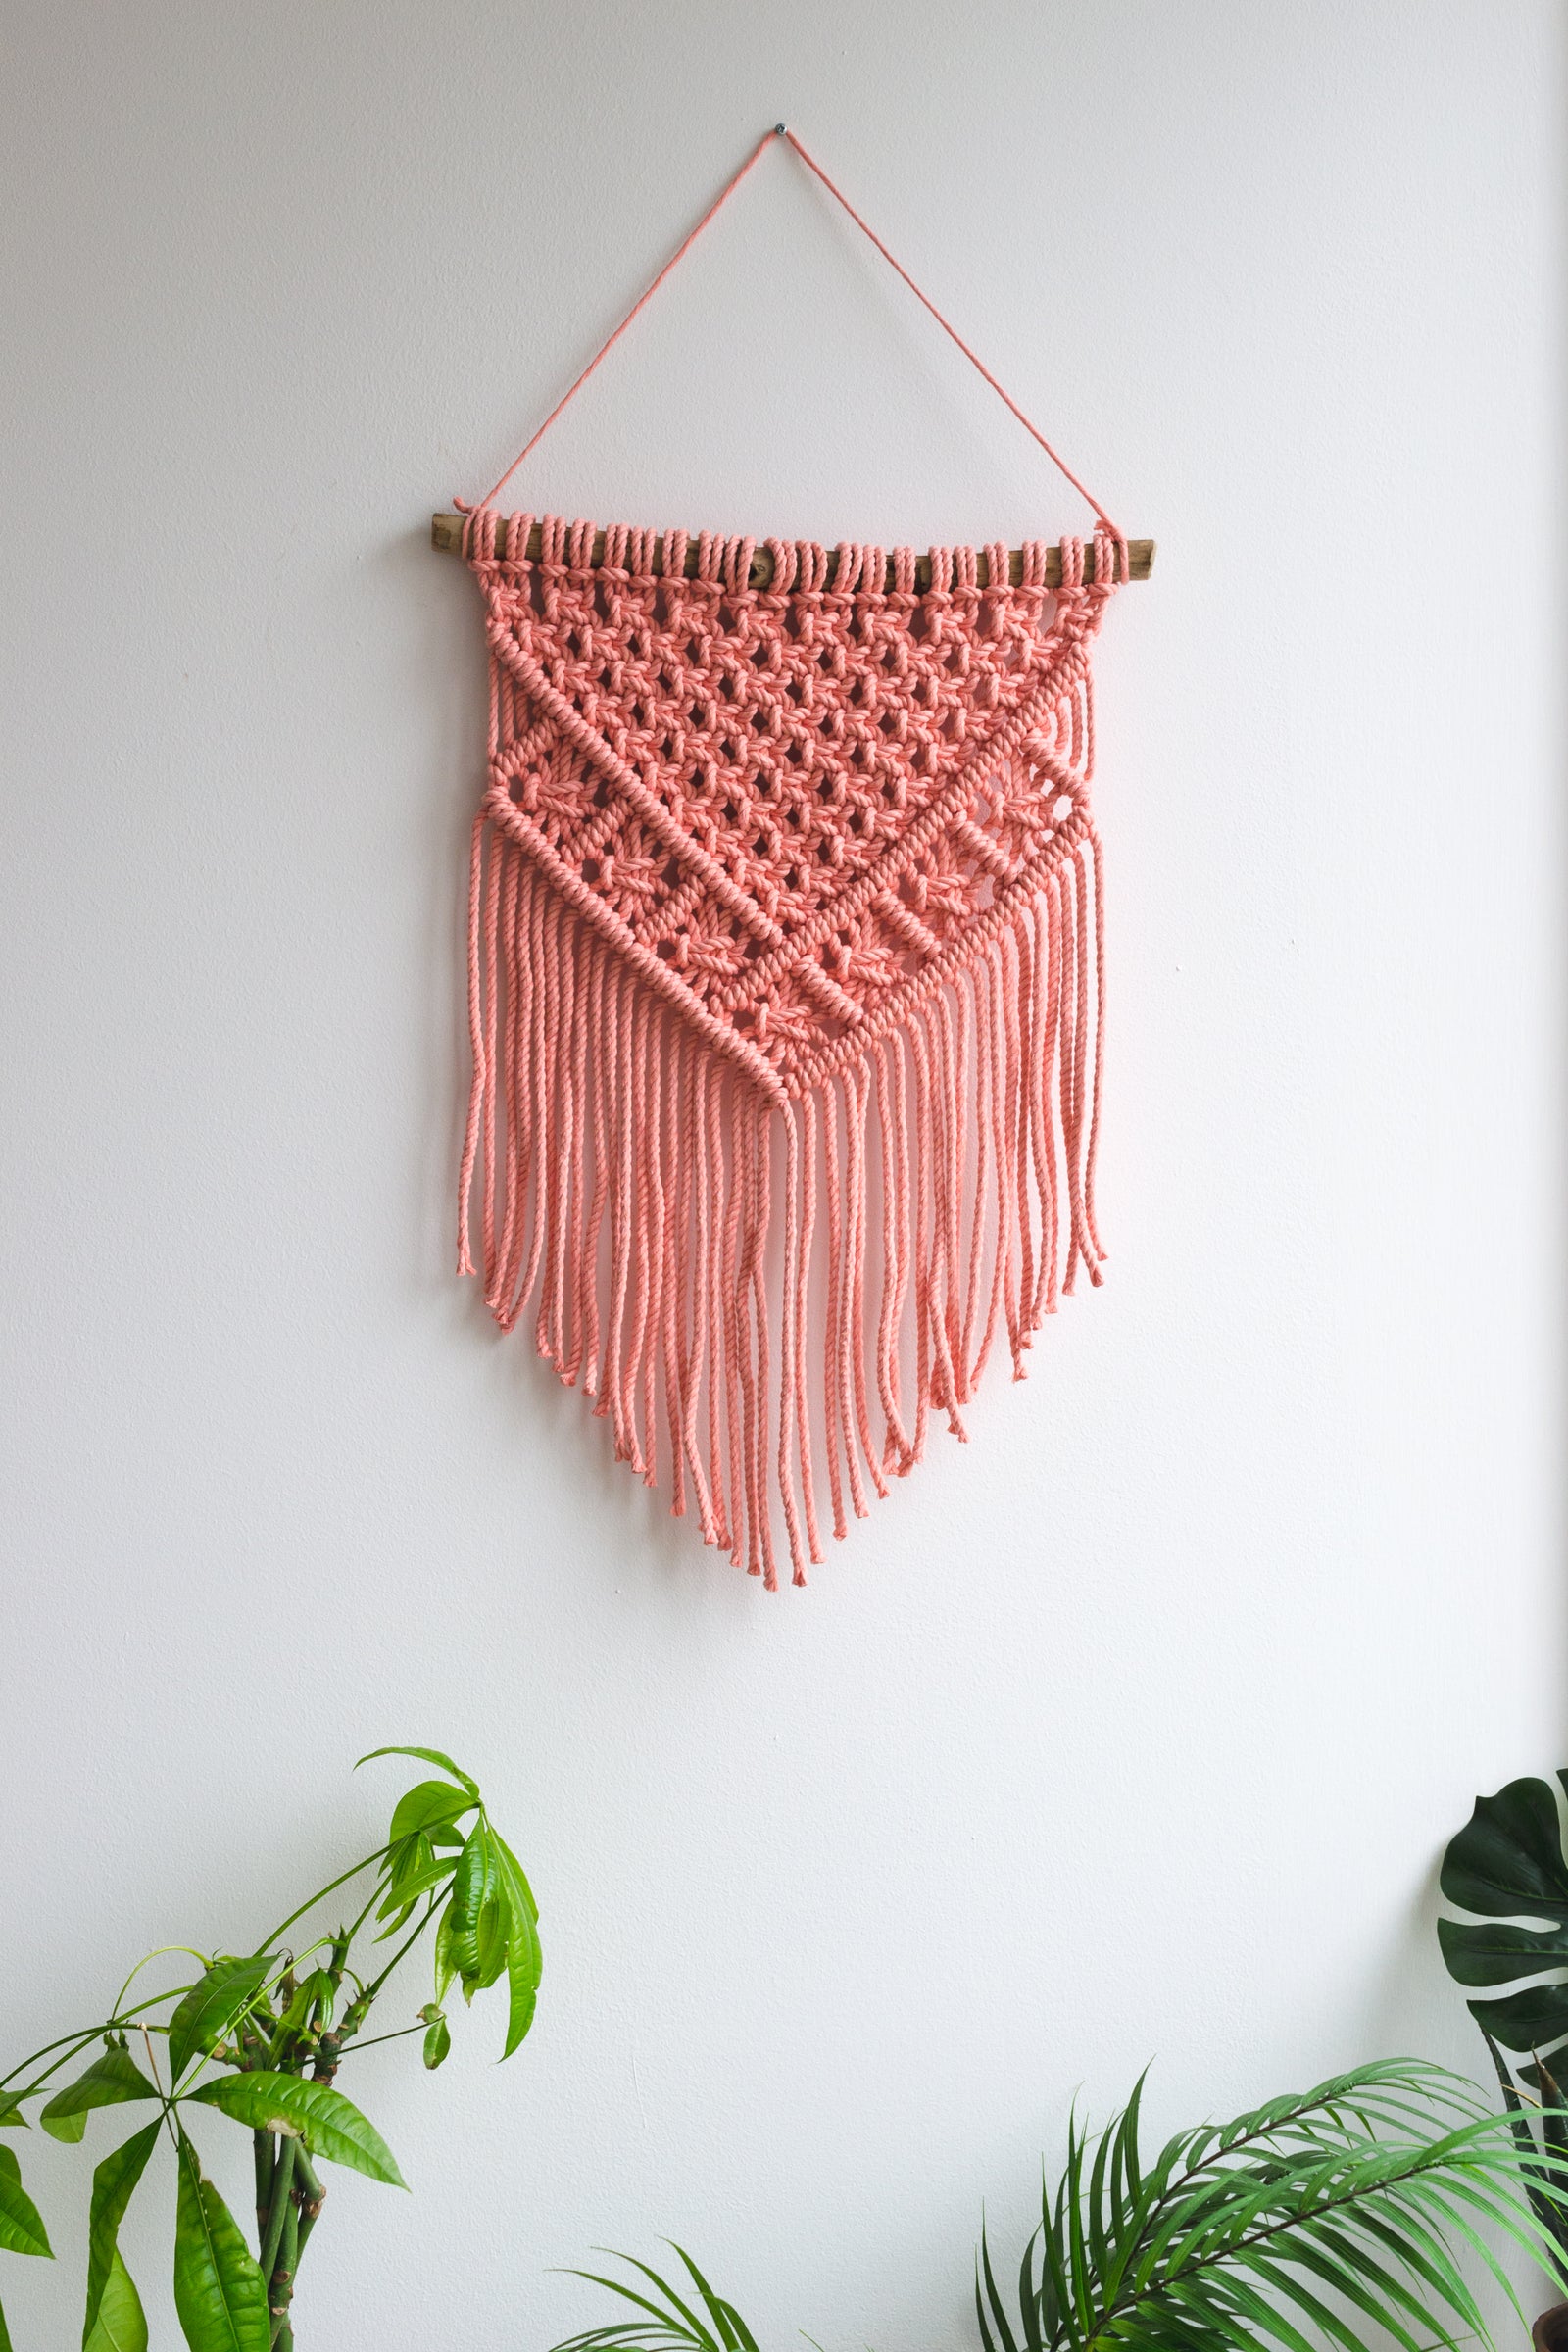 Macrame Patterns and Knot Guide - Completely Free - MangoAndMore